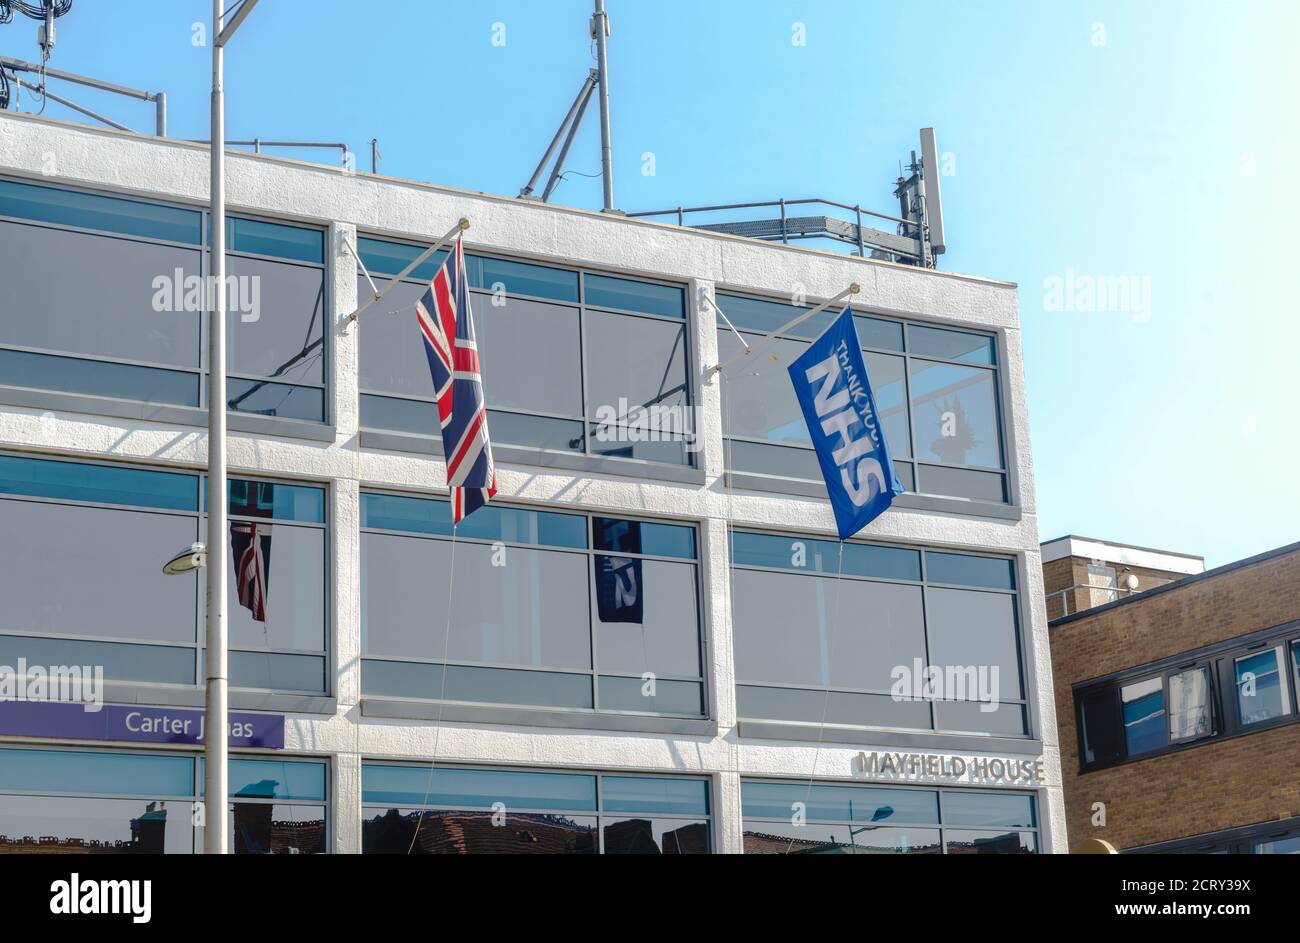 'Thank you NHS' flags on Mayfield House, Summertown, Oxford, UK Stock Photo